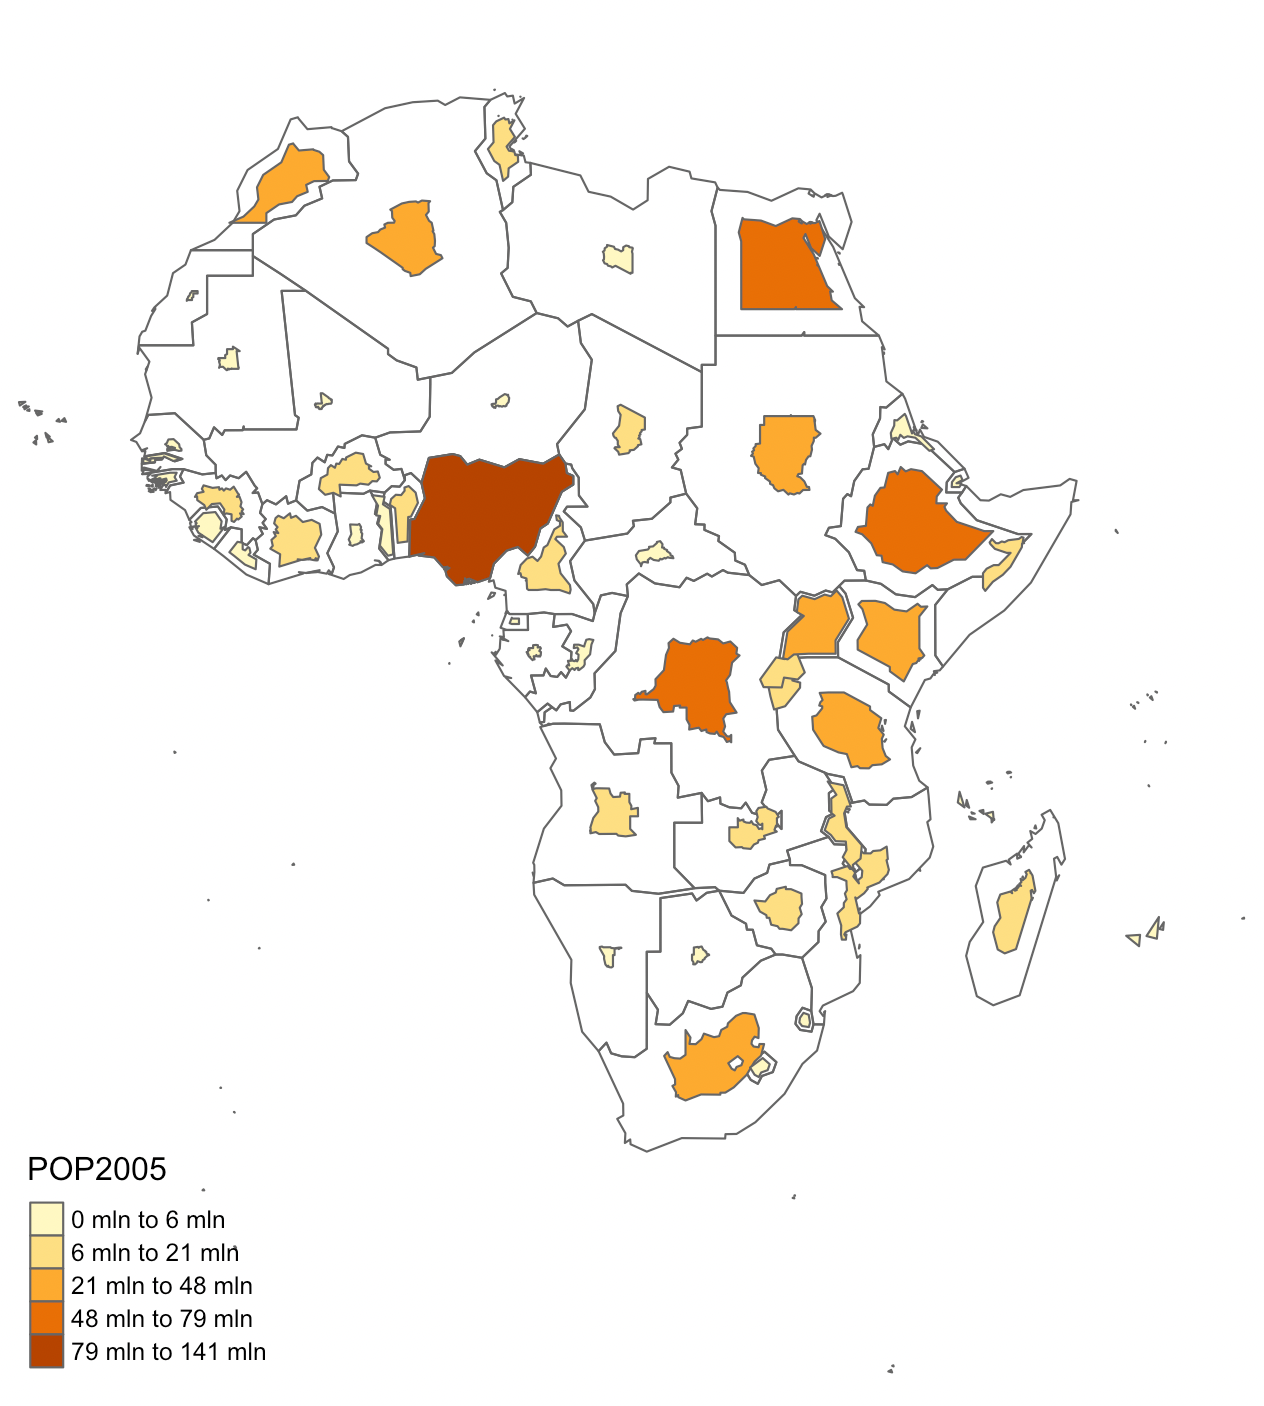 A non-contiguous cartogram of African countries and their populations